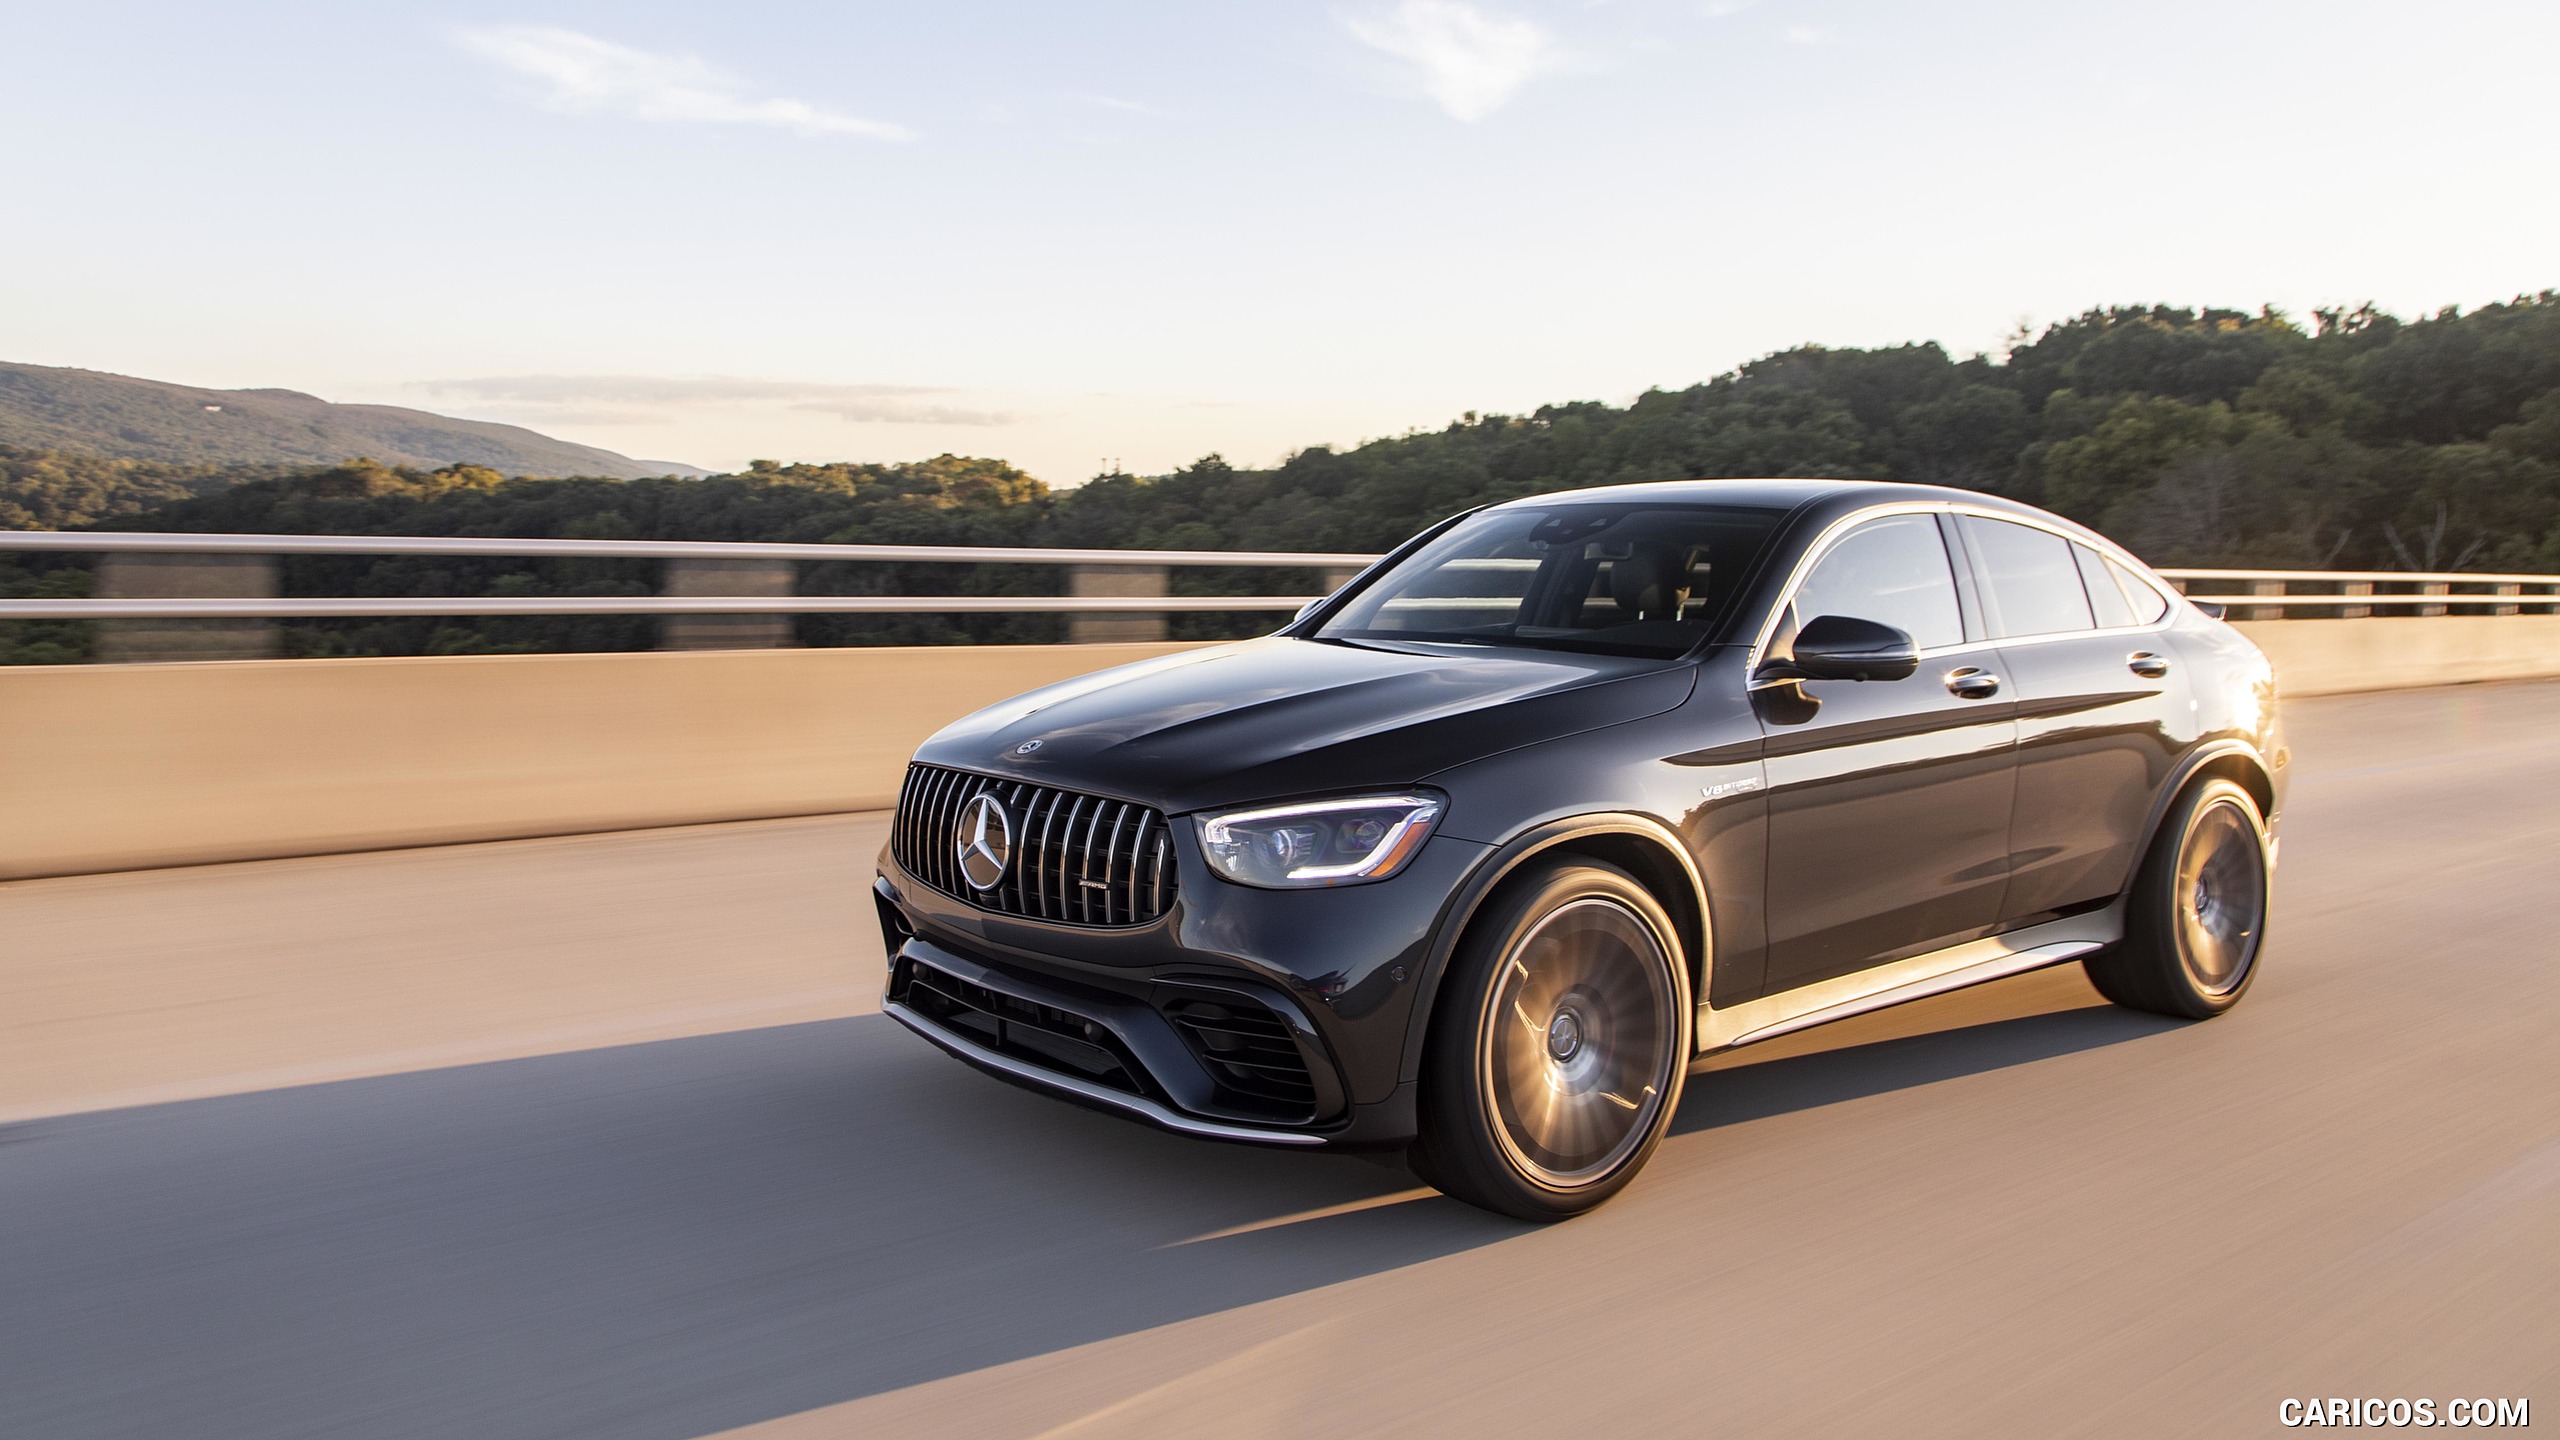 2020 Mercedes-AMG GLC 63 S Coupe (US-Spec) - Front Three-Quarter, #43 of 102